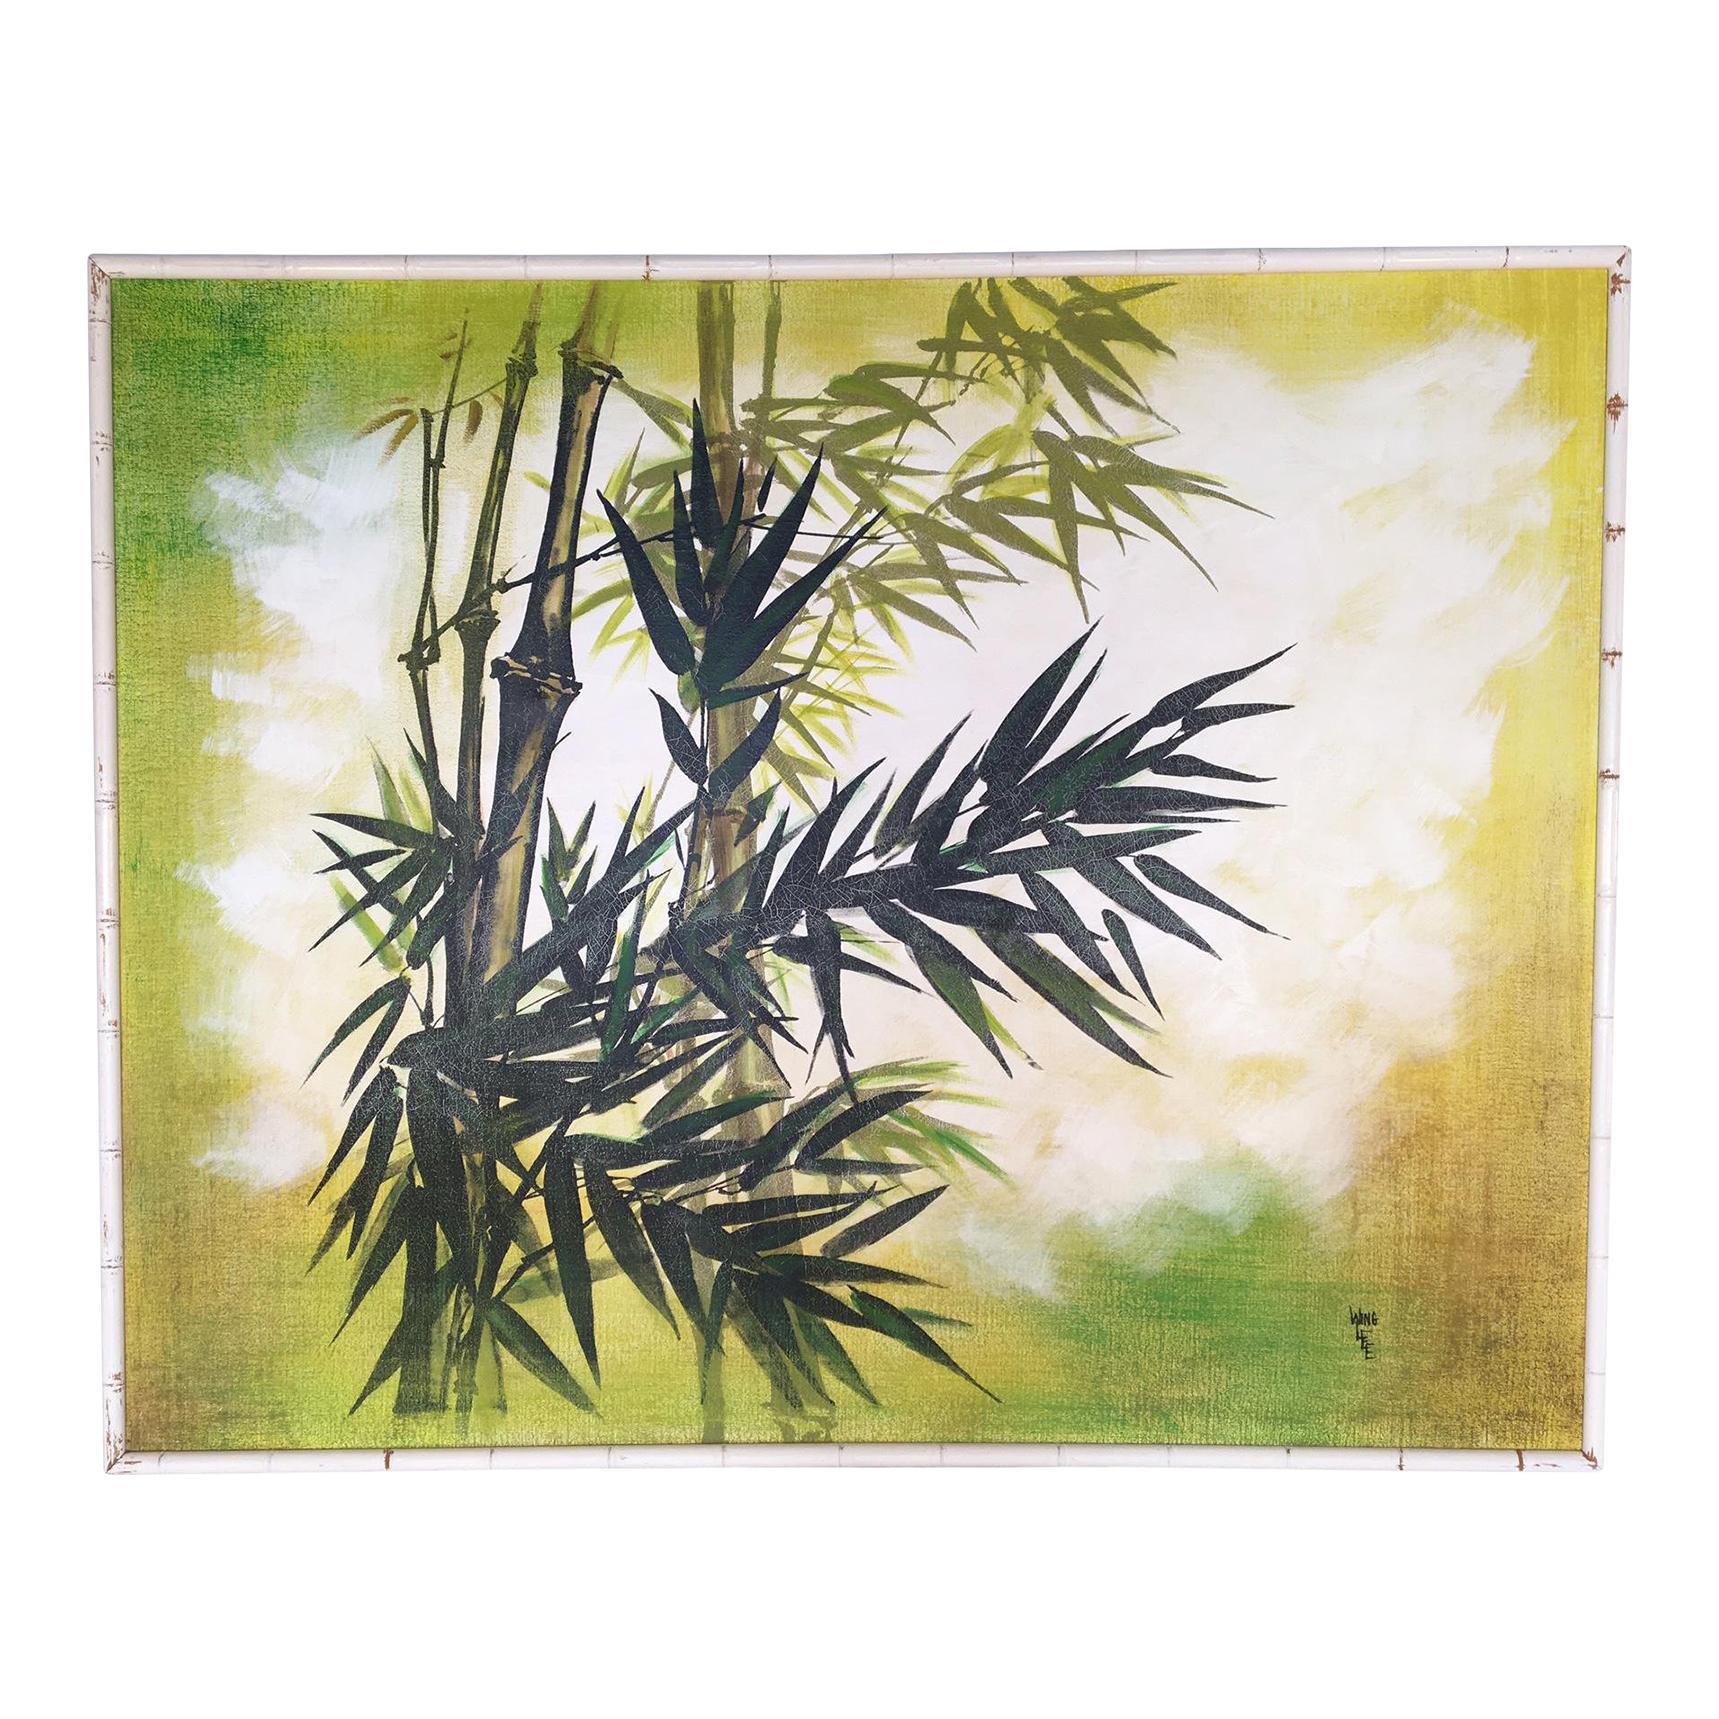 This oversized framed painting by 1970's artist Wing Lee makes a bold statement in any Hollywood Regency decor. Asian inspired bamboo abstract on canvas in greens and yellows with a white faux bamboo frame. Tons of character with it's slightly